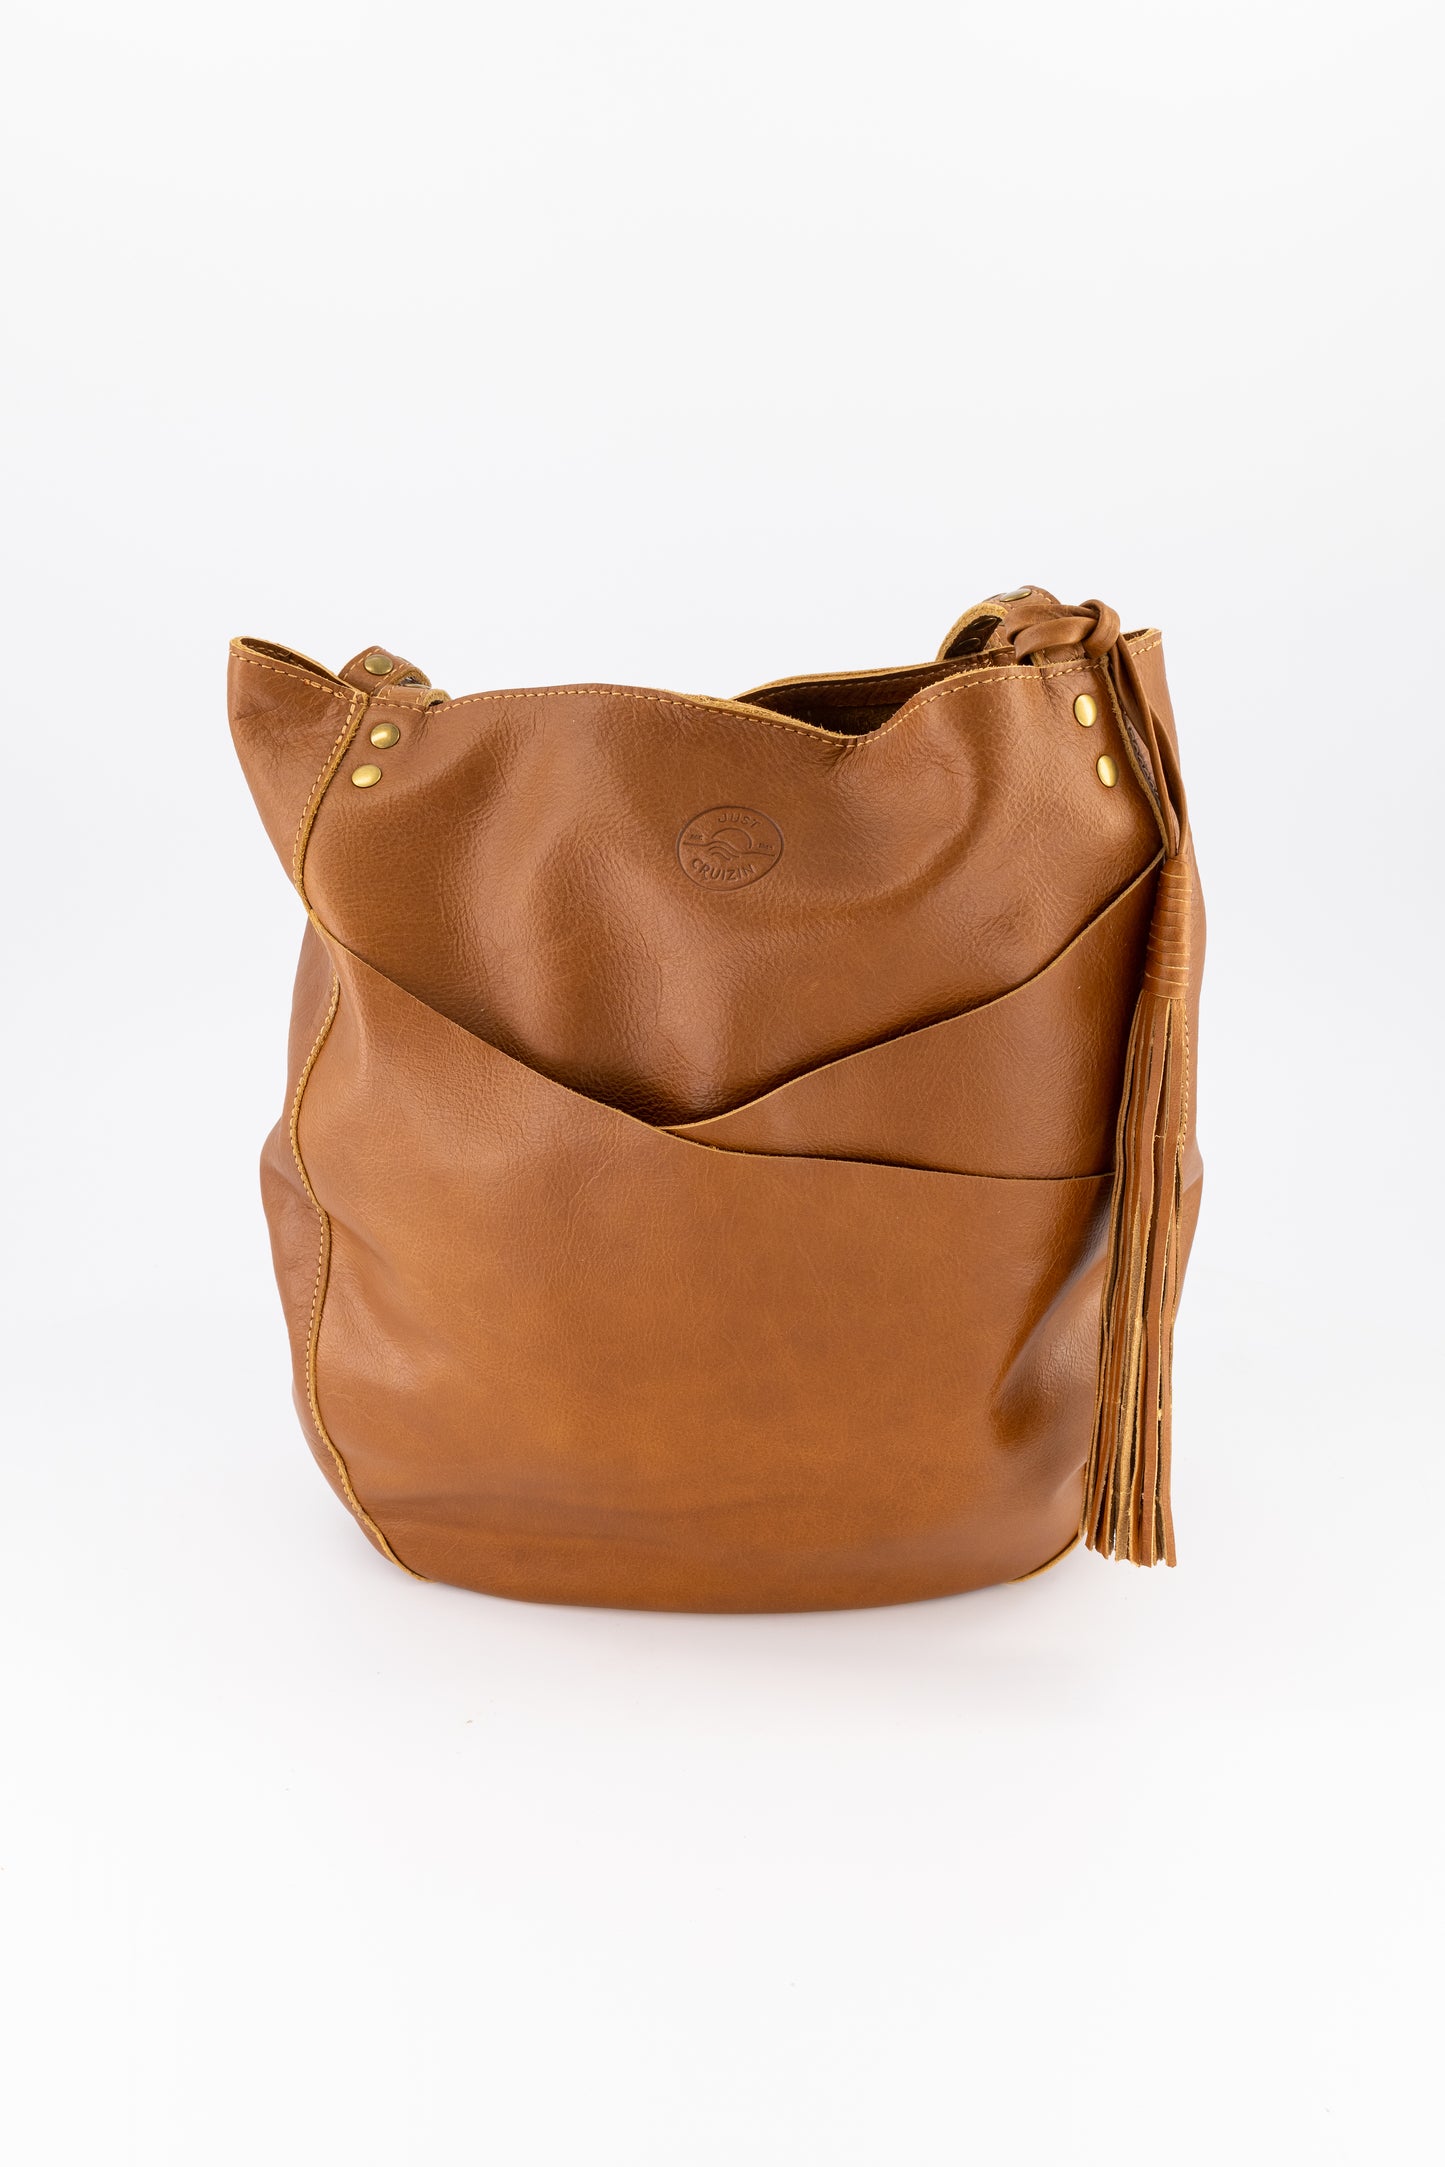 Posey Leather Shopper Bag